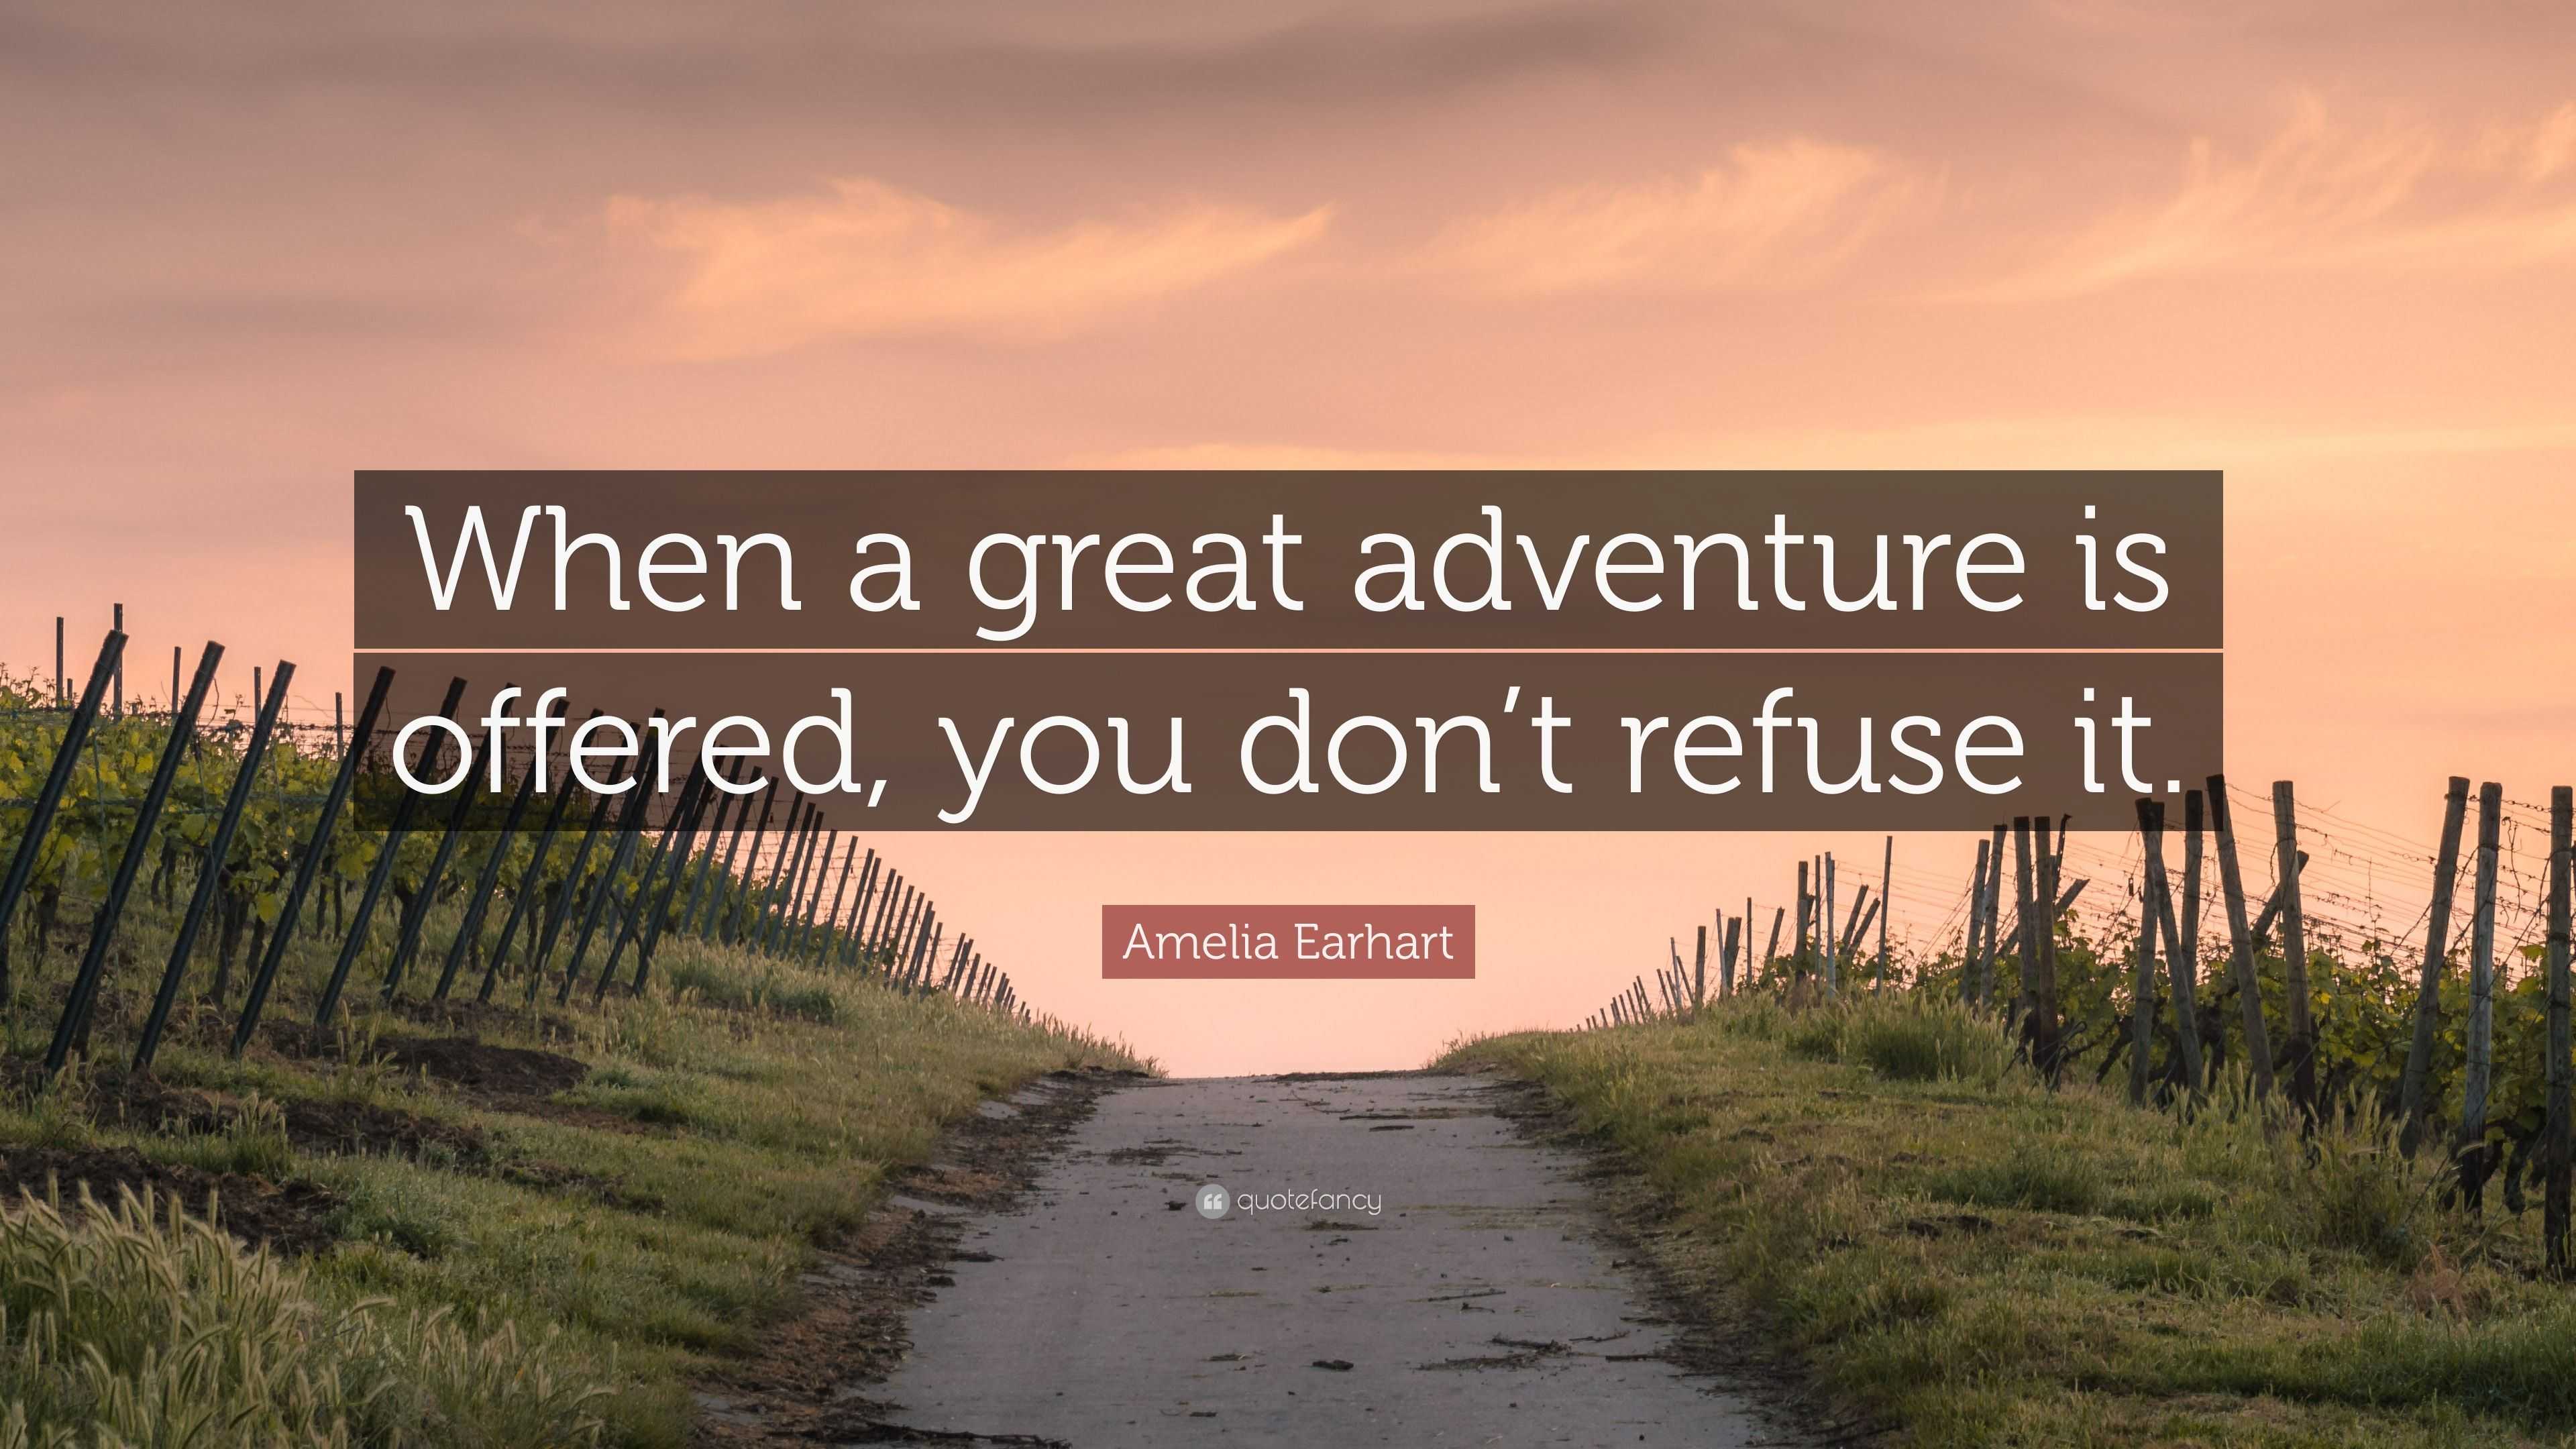 Amelia Earhart Quote: “When a great adventure is offered, you don’t